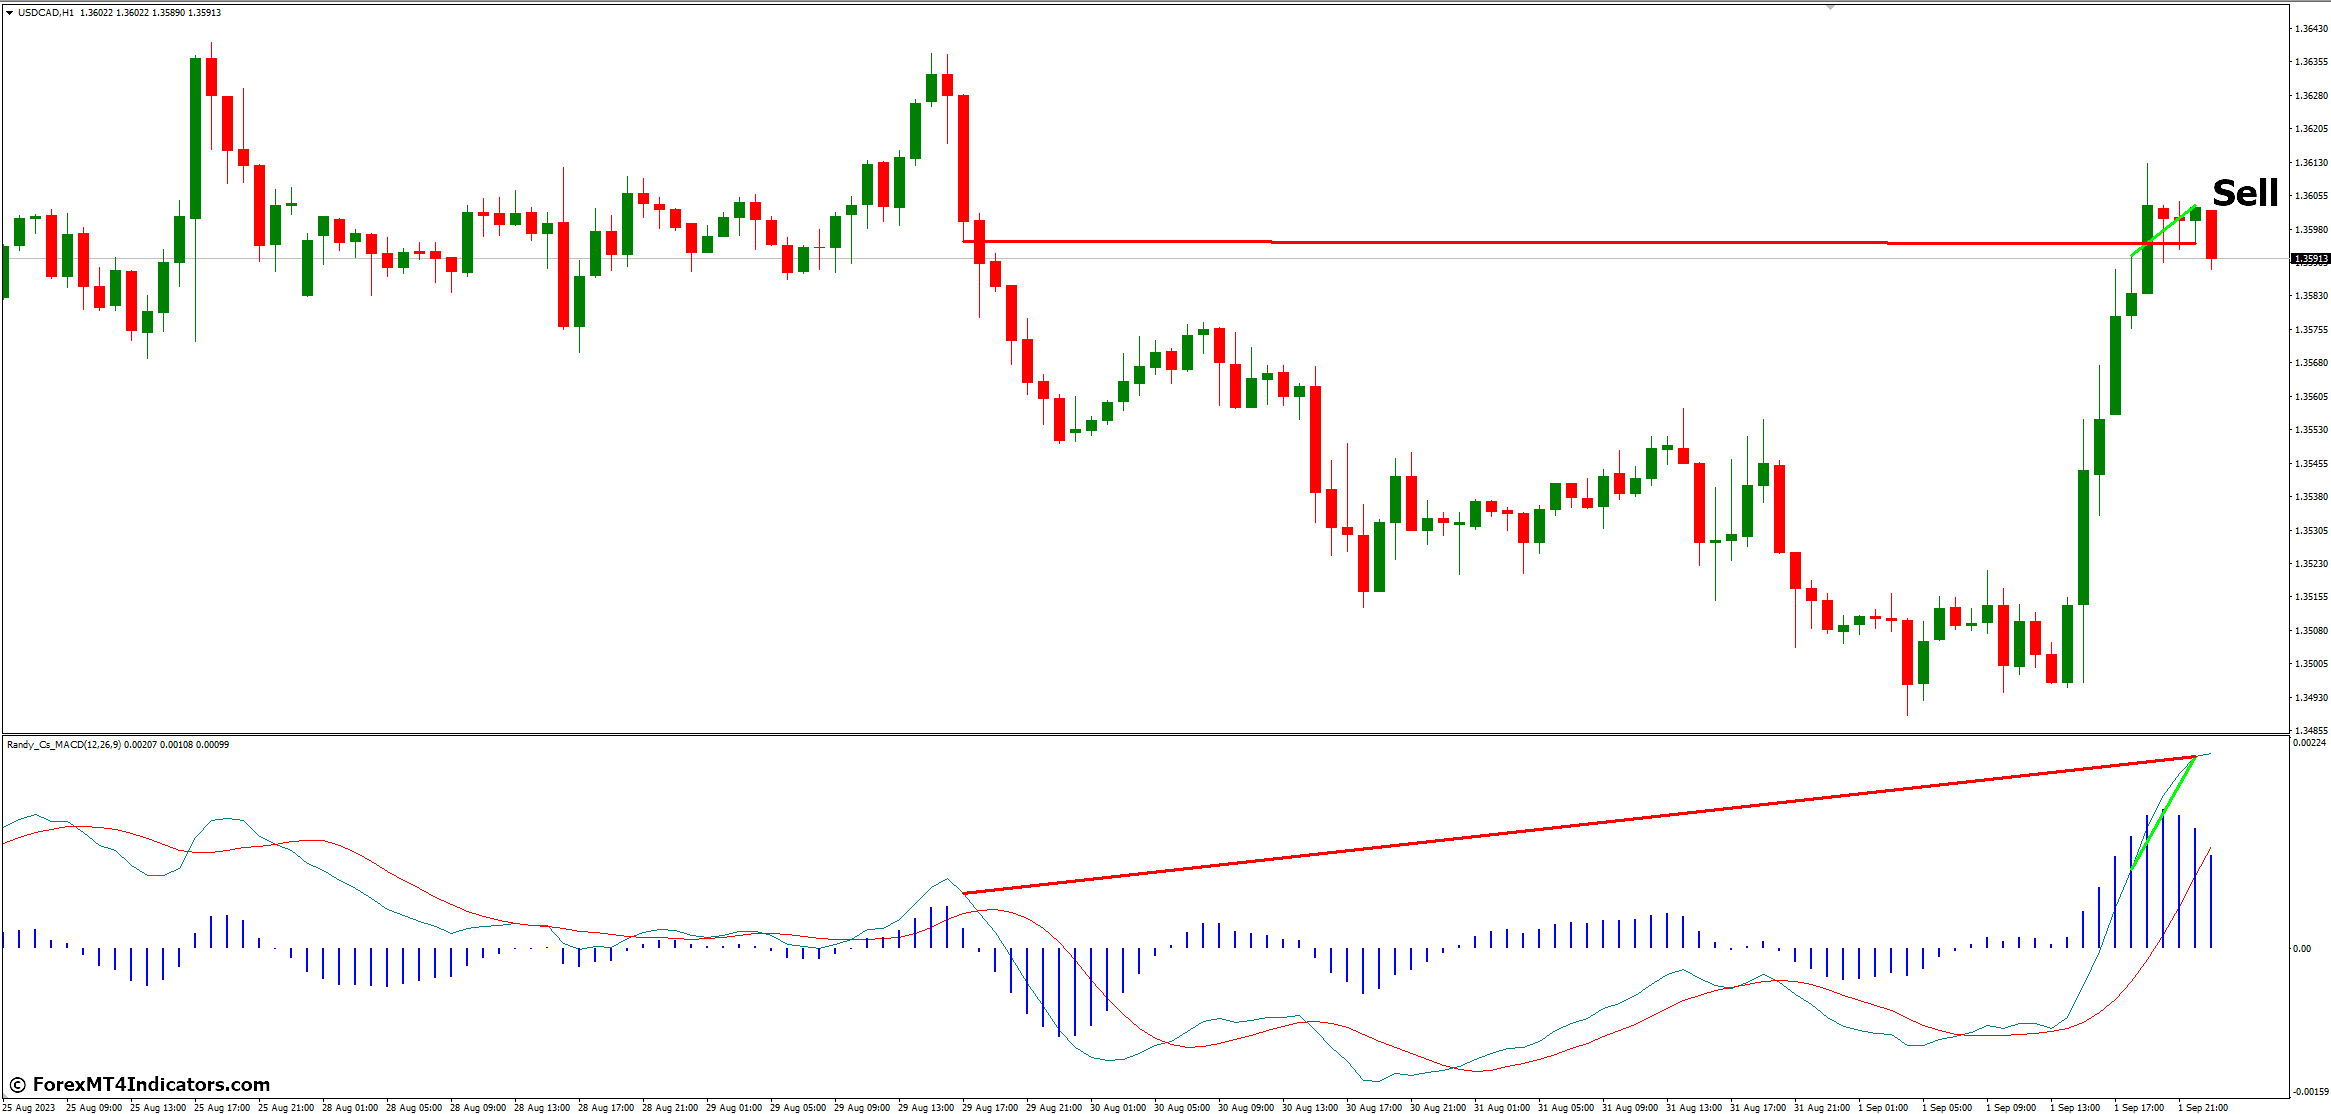 How to Trade with MACD Divergence MT4 Indicator - Sell Entry